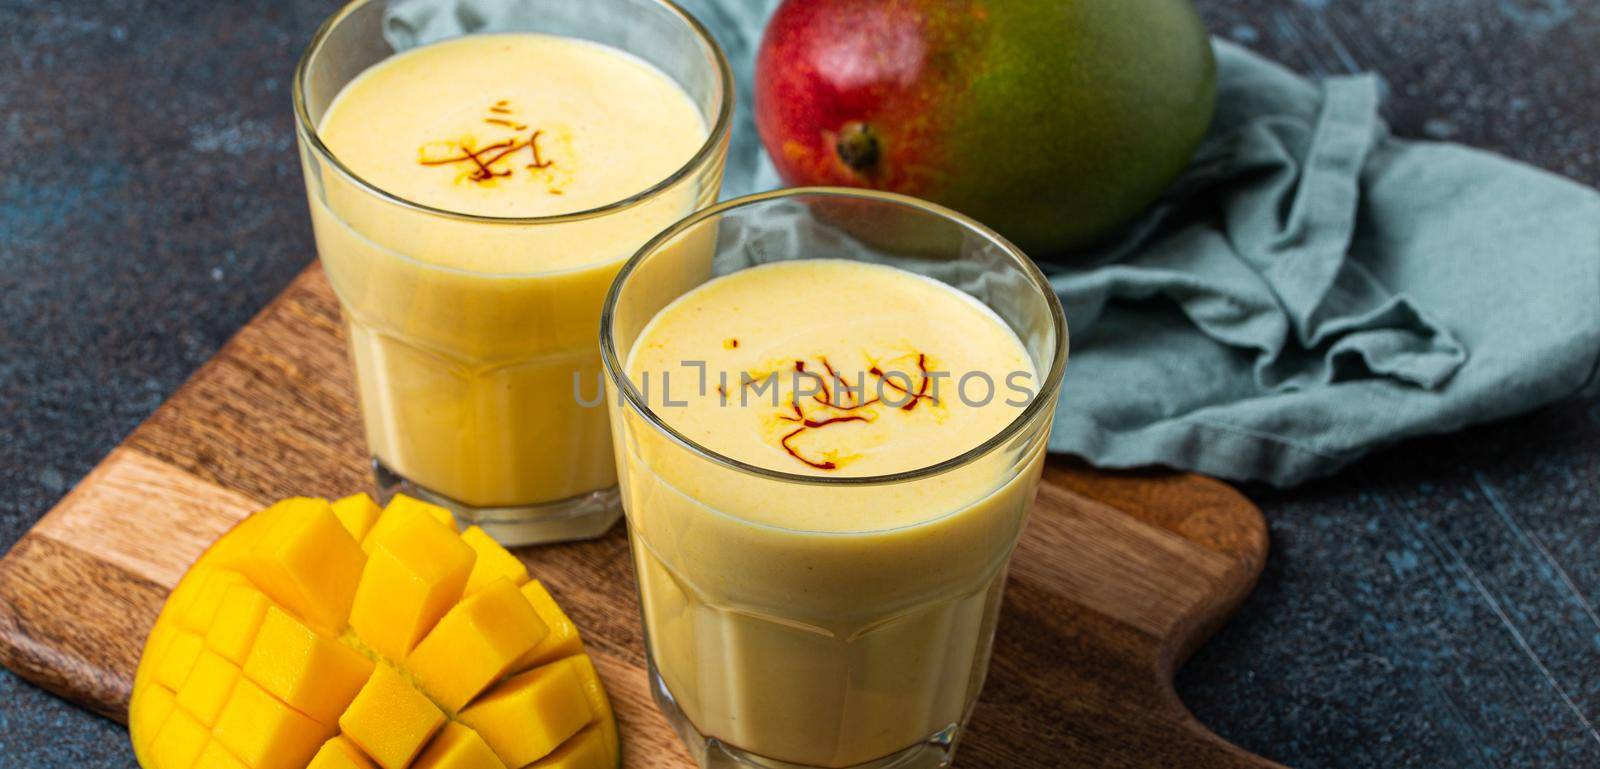 Healthy Indian Ayurveda drink mango lassi in two glasses on rustic concrete table with fresh ripe cut mango, yellow blended beverage made of mango fruit, yoghurt or milk curd and spices